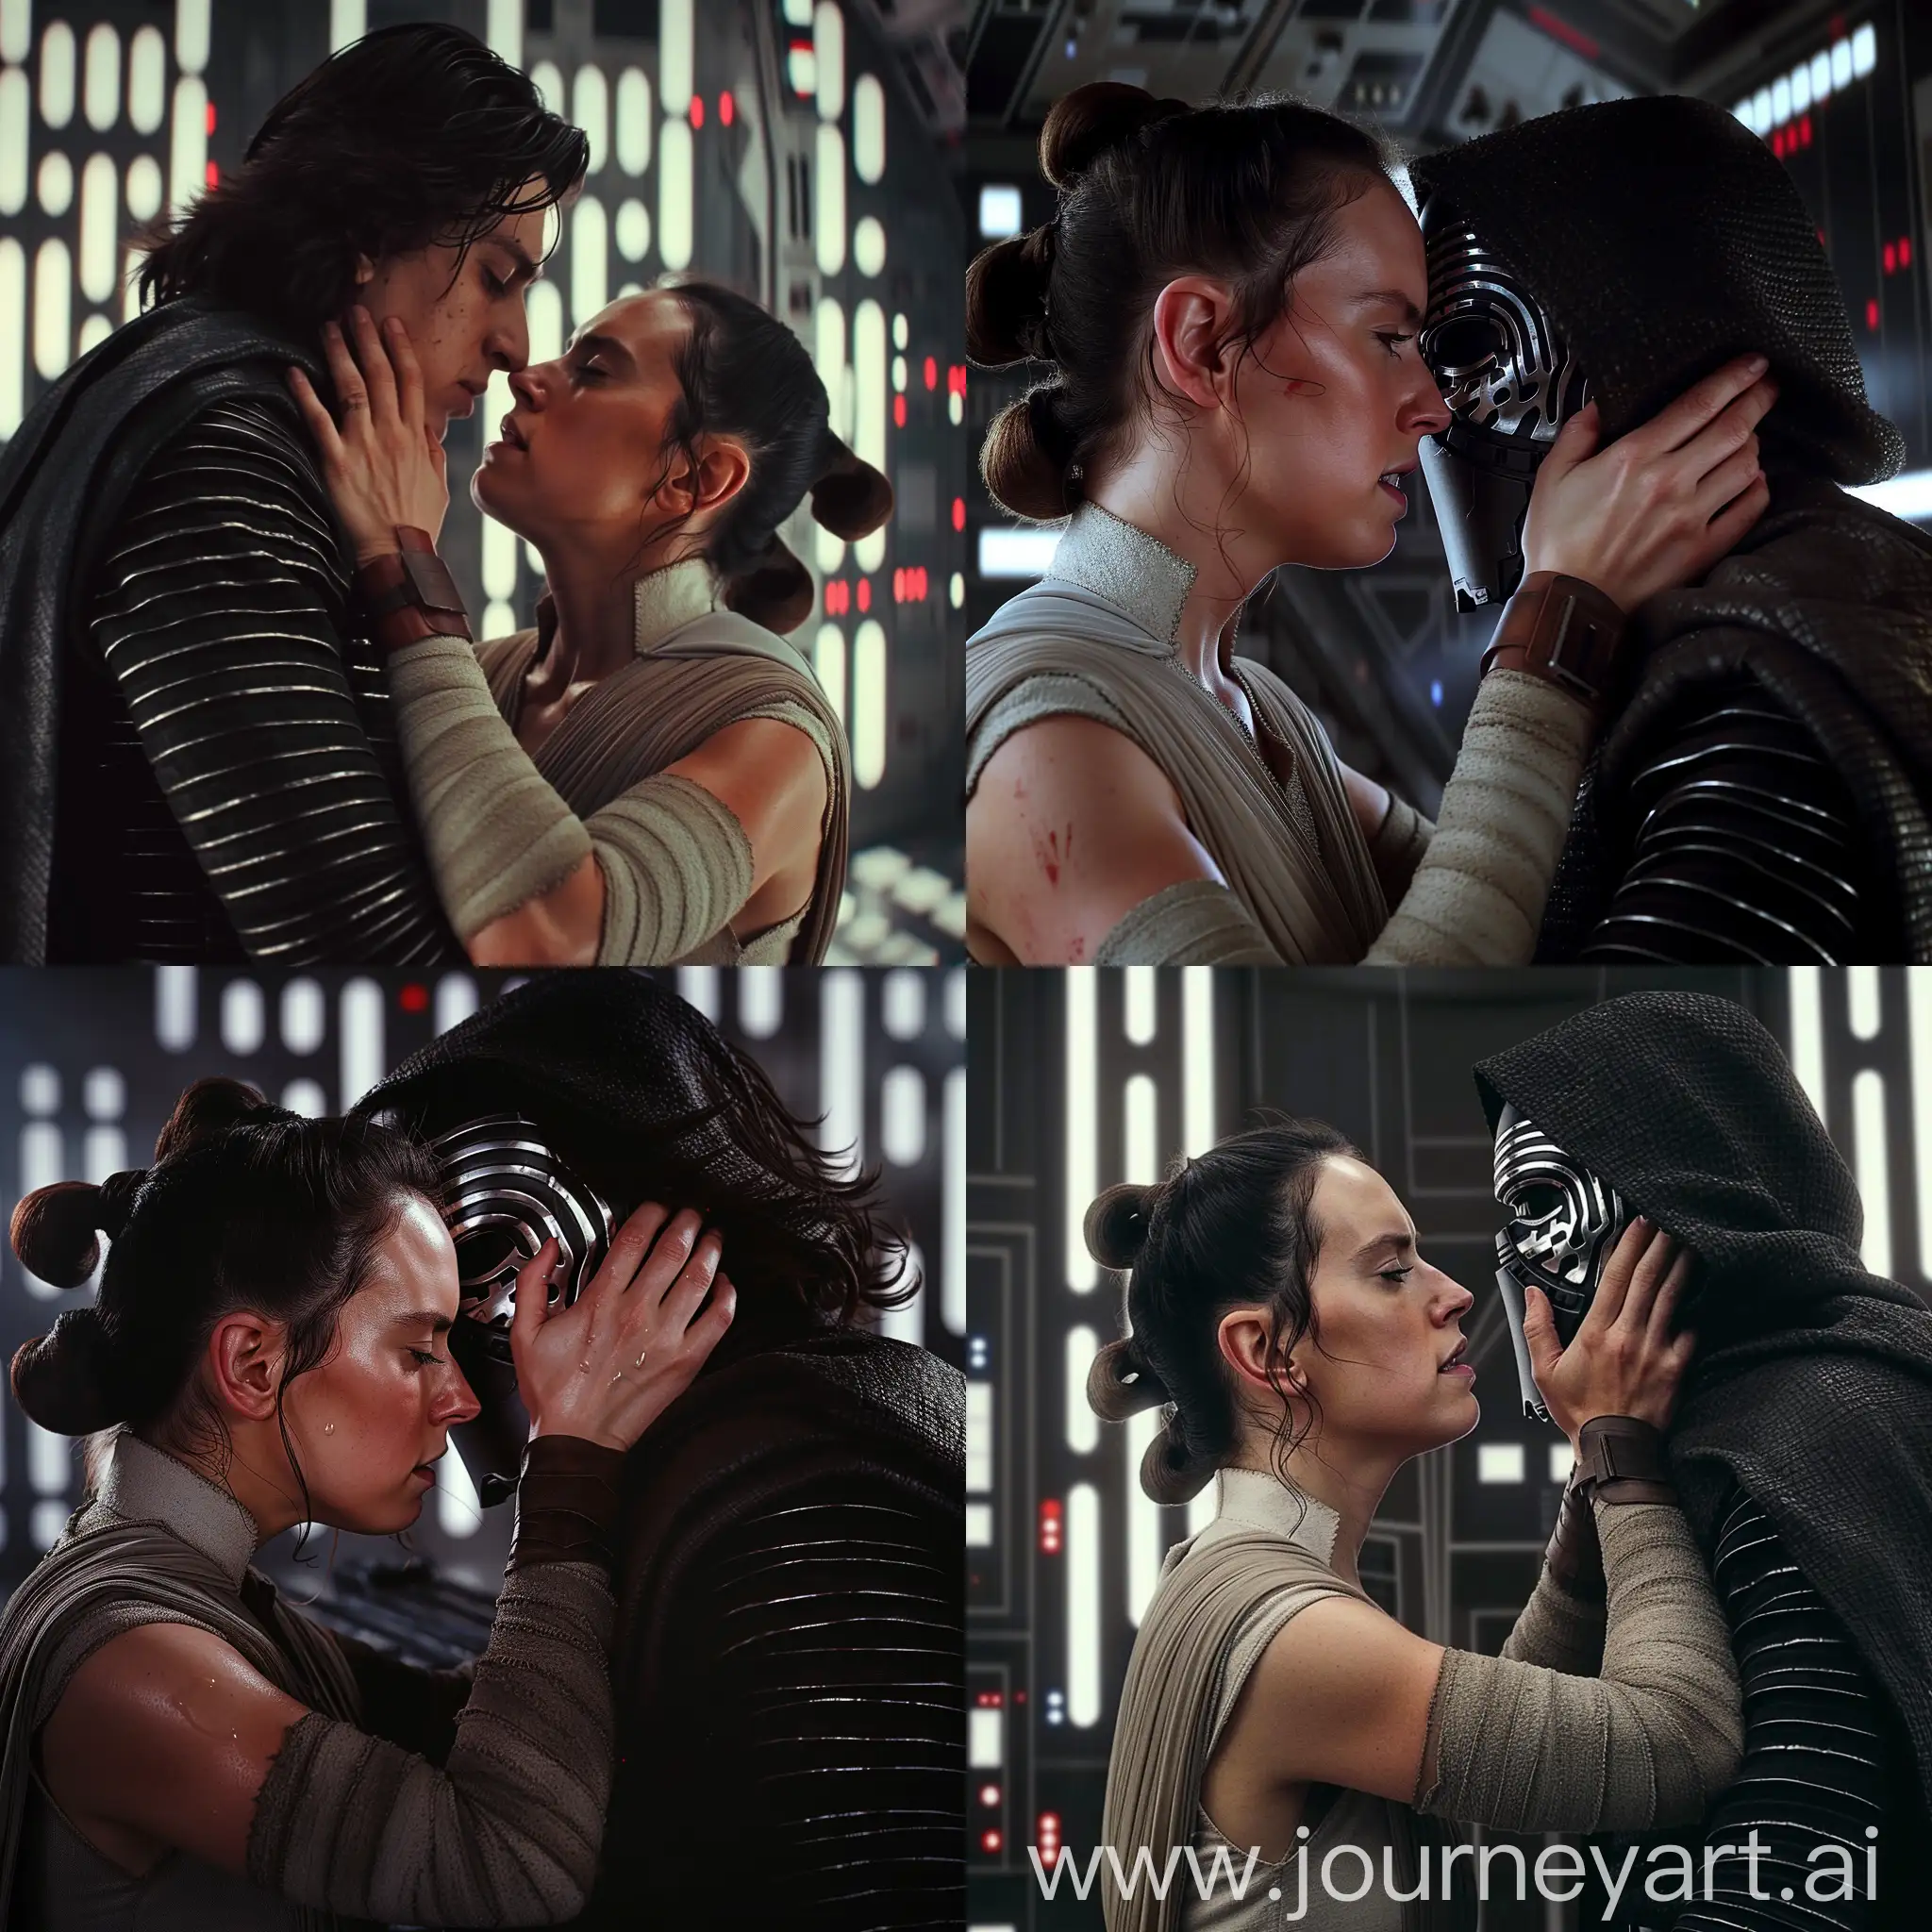 hyper-realistic images from the new Star Wars film, with Rey Skywalker facing Kylo Ren face to face with her hand squeezing his neck, in Spaceship 8k resolution